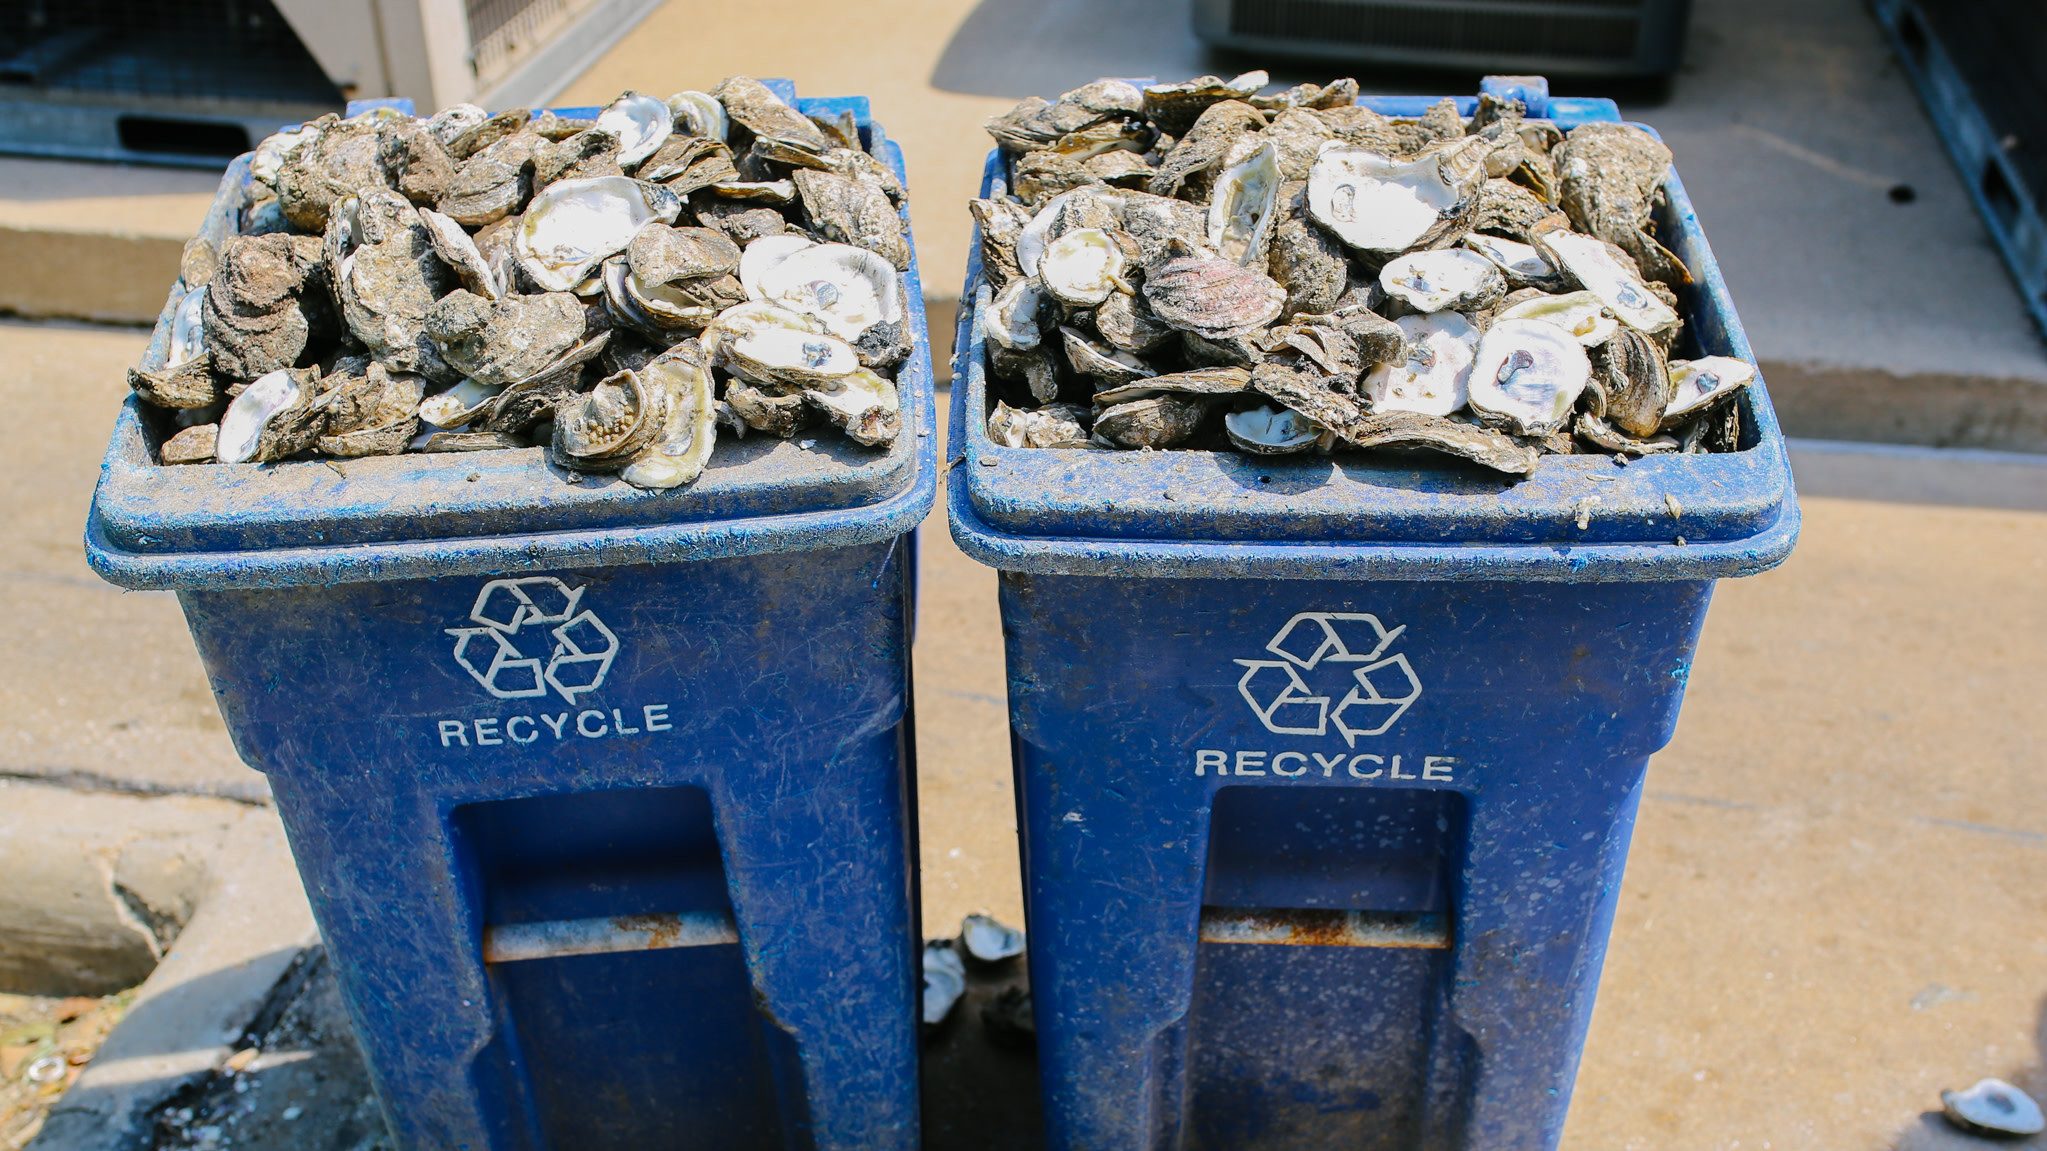 A Program Is Turning Discarded Oyster Shells Into Treasure